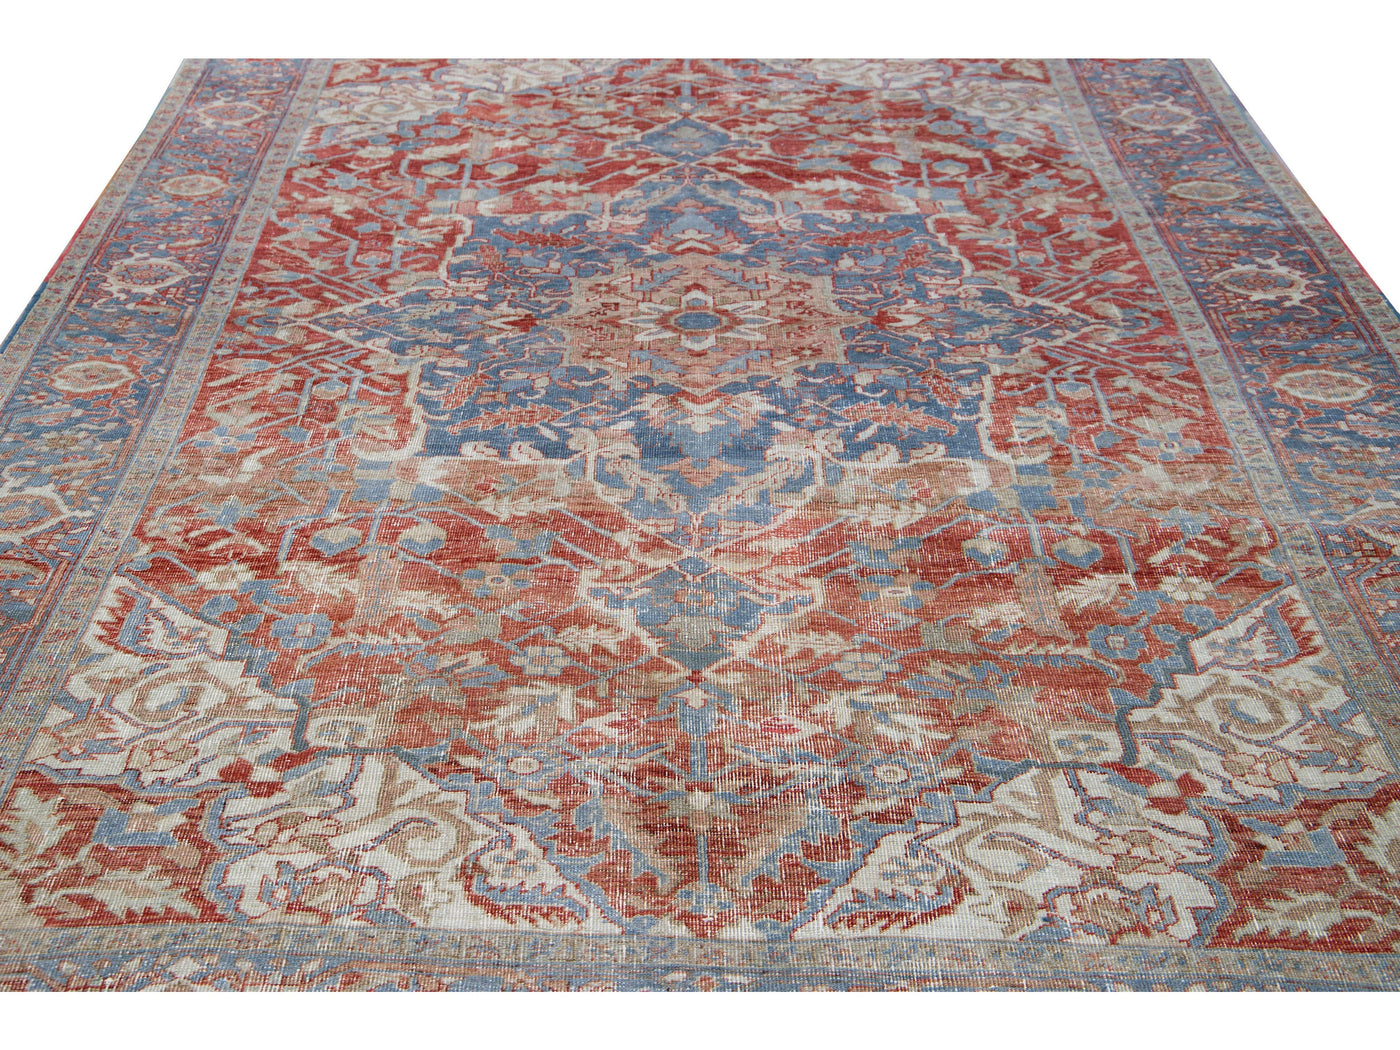 Antique Persian Heriz Handmade Red and Blue Medallion Floral Wool Rug.